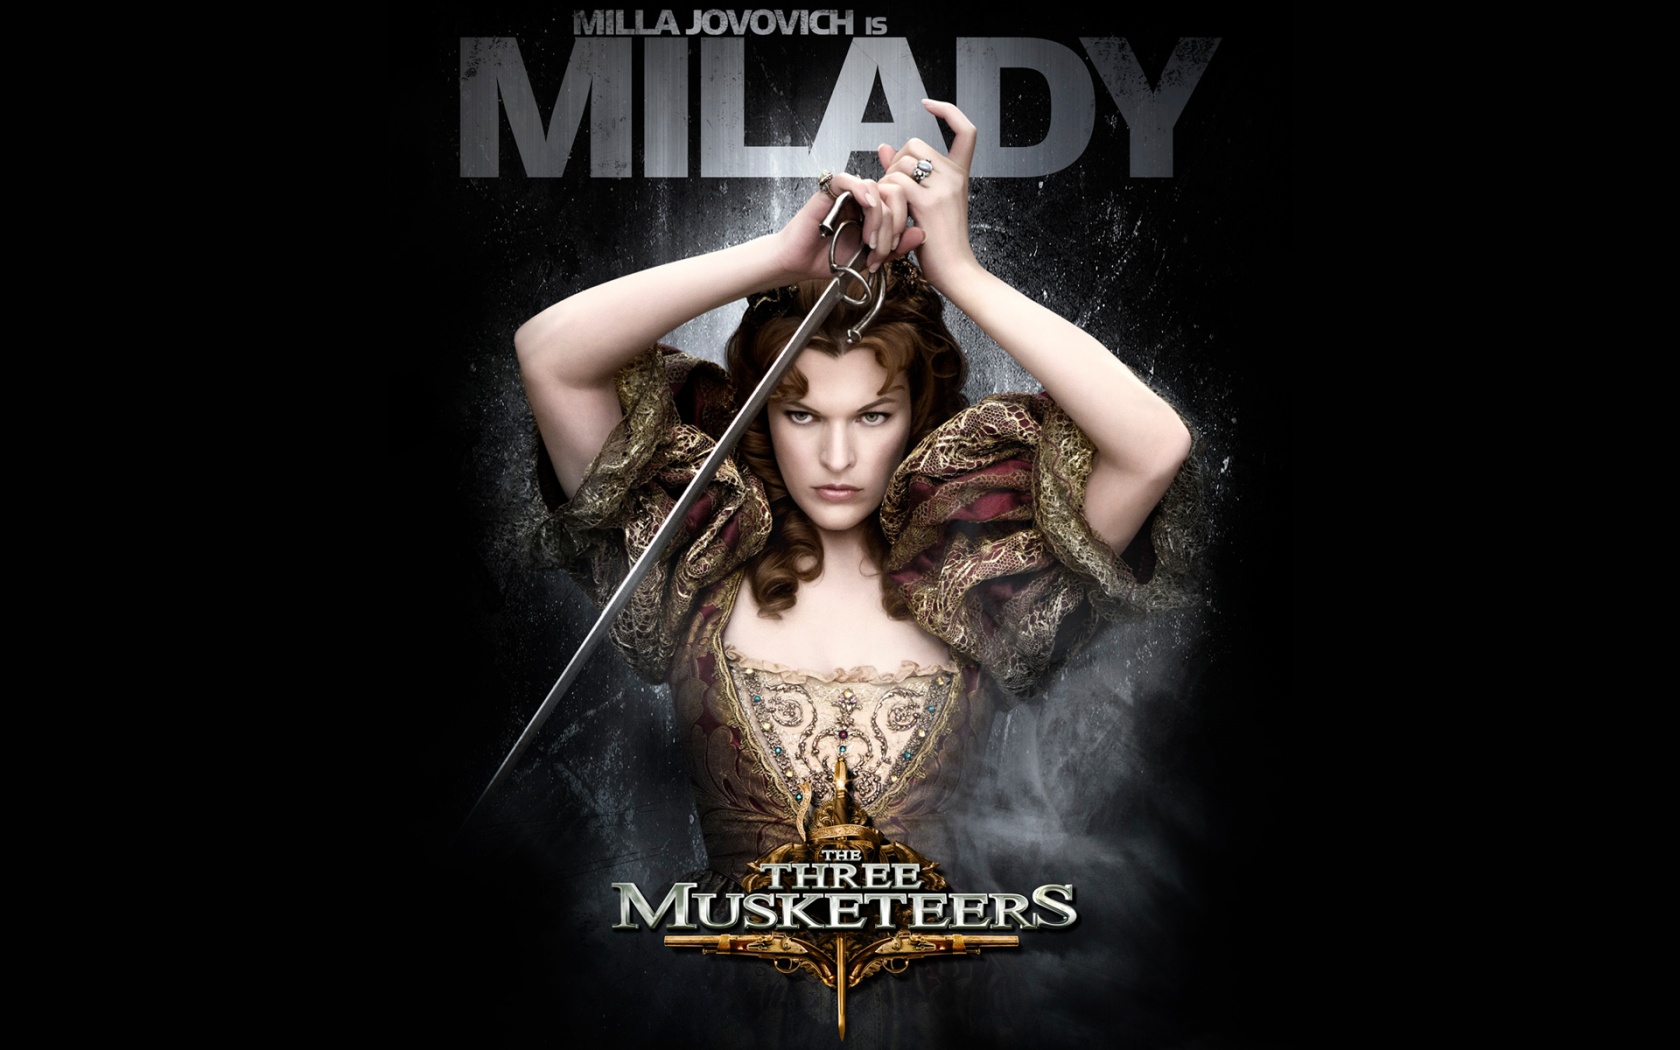 The Three Musketeers 2011 Wallpapers Mlady De Winter